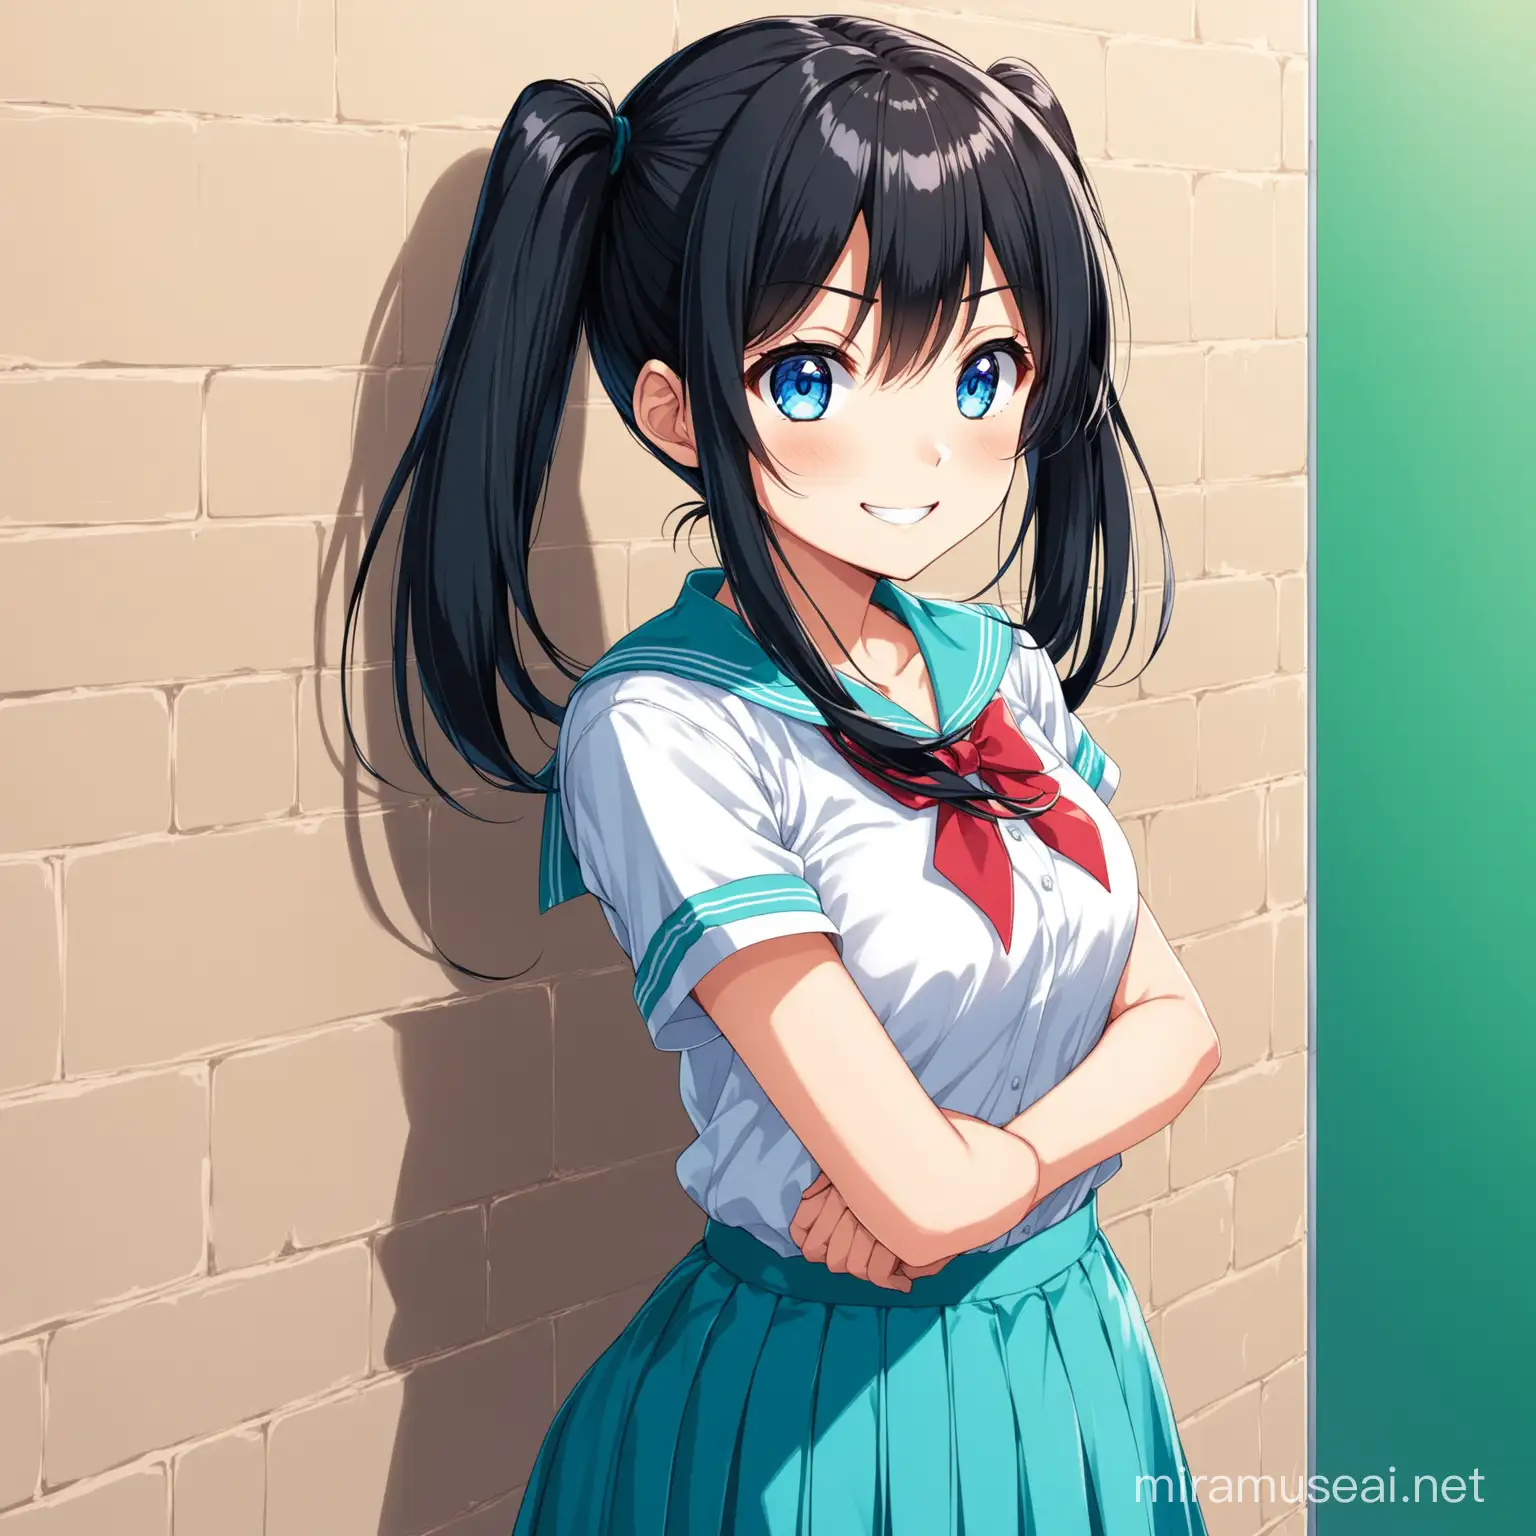 17 years highschooler anime girl black hair,blue eyes, twintail, standing against a wall waiting for someone. mischievous smile 